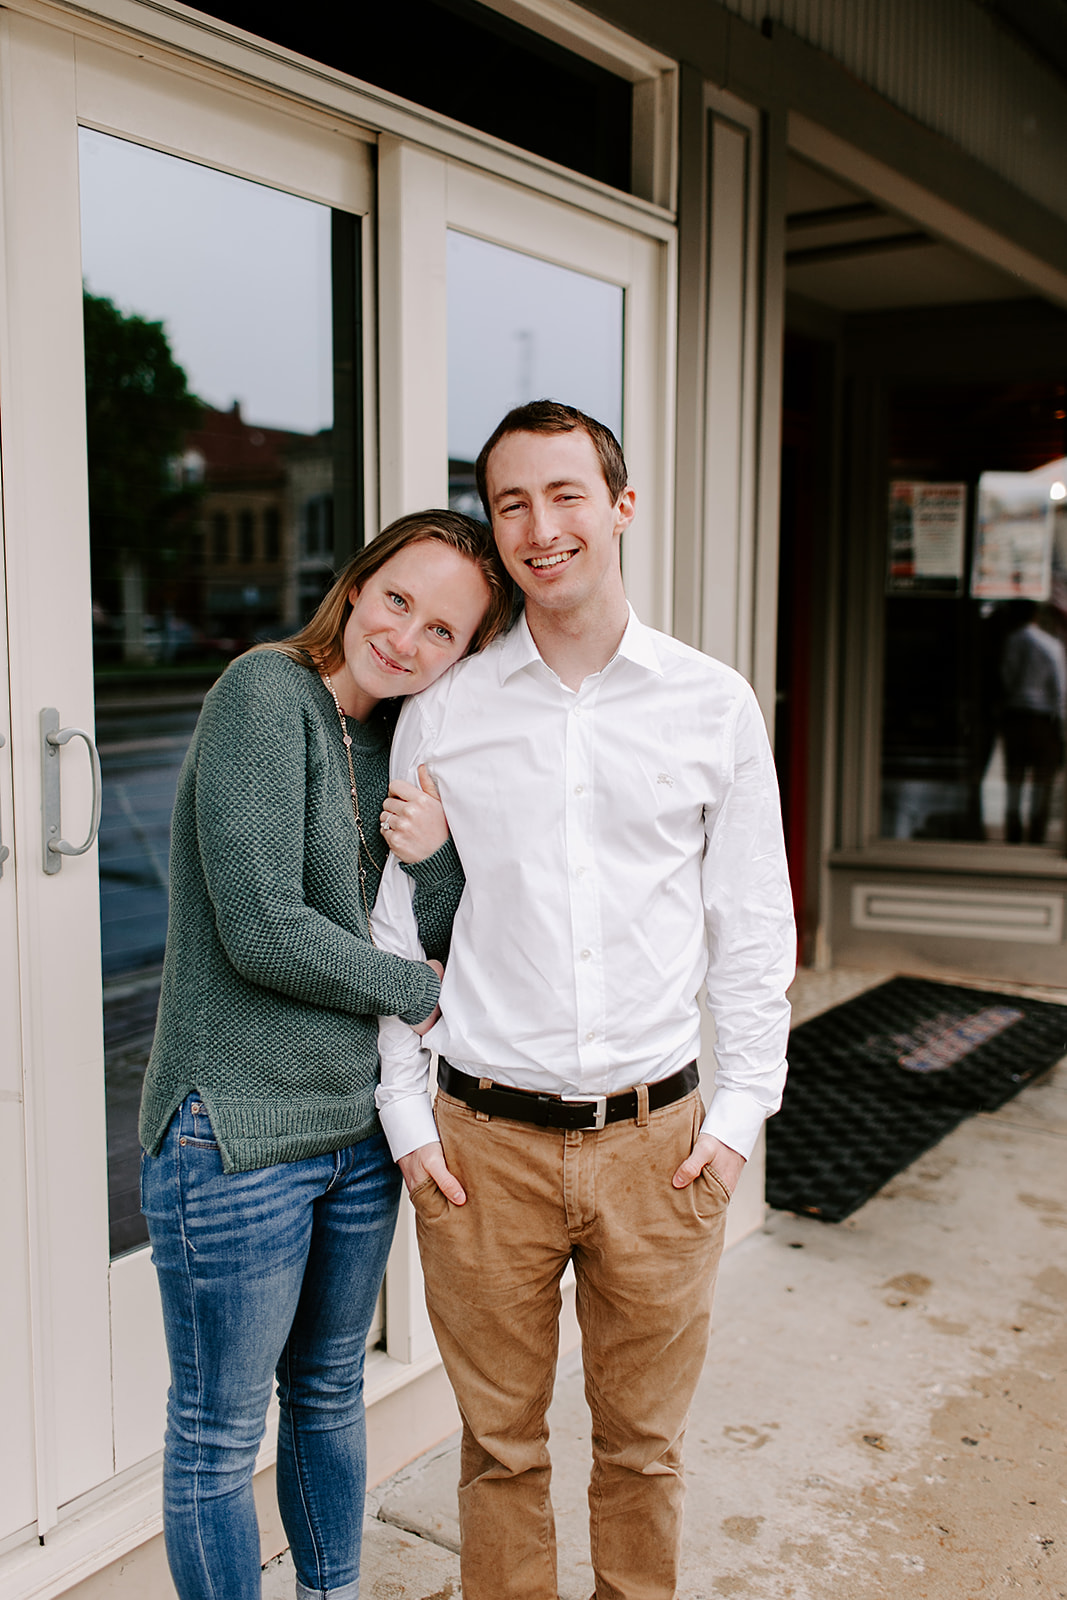 Rainy Noblesville Engagement Session including outfit ideas and posing inspiration | Photography by Emily Elyse Wehner, Noblesville Engagement photographer